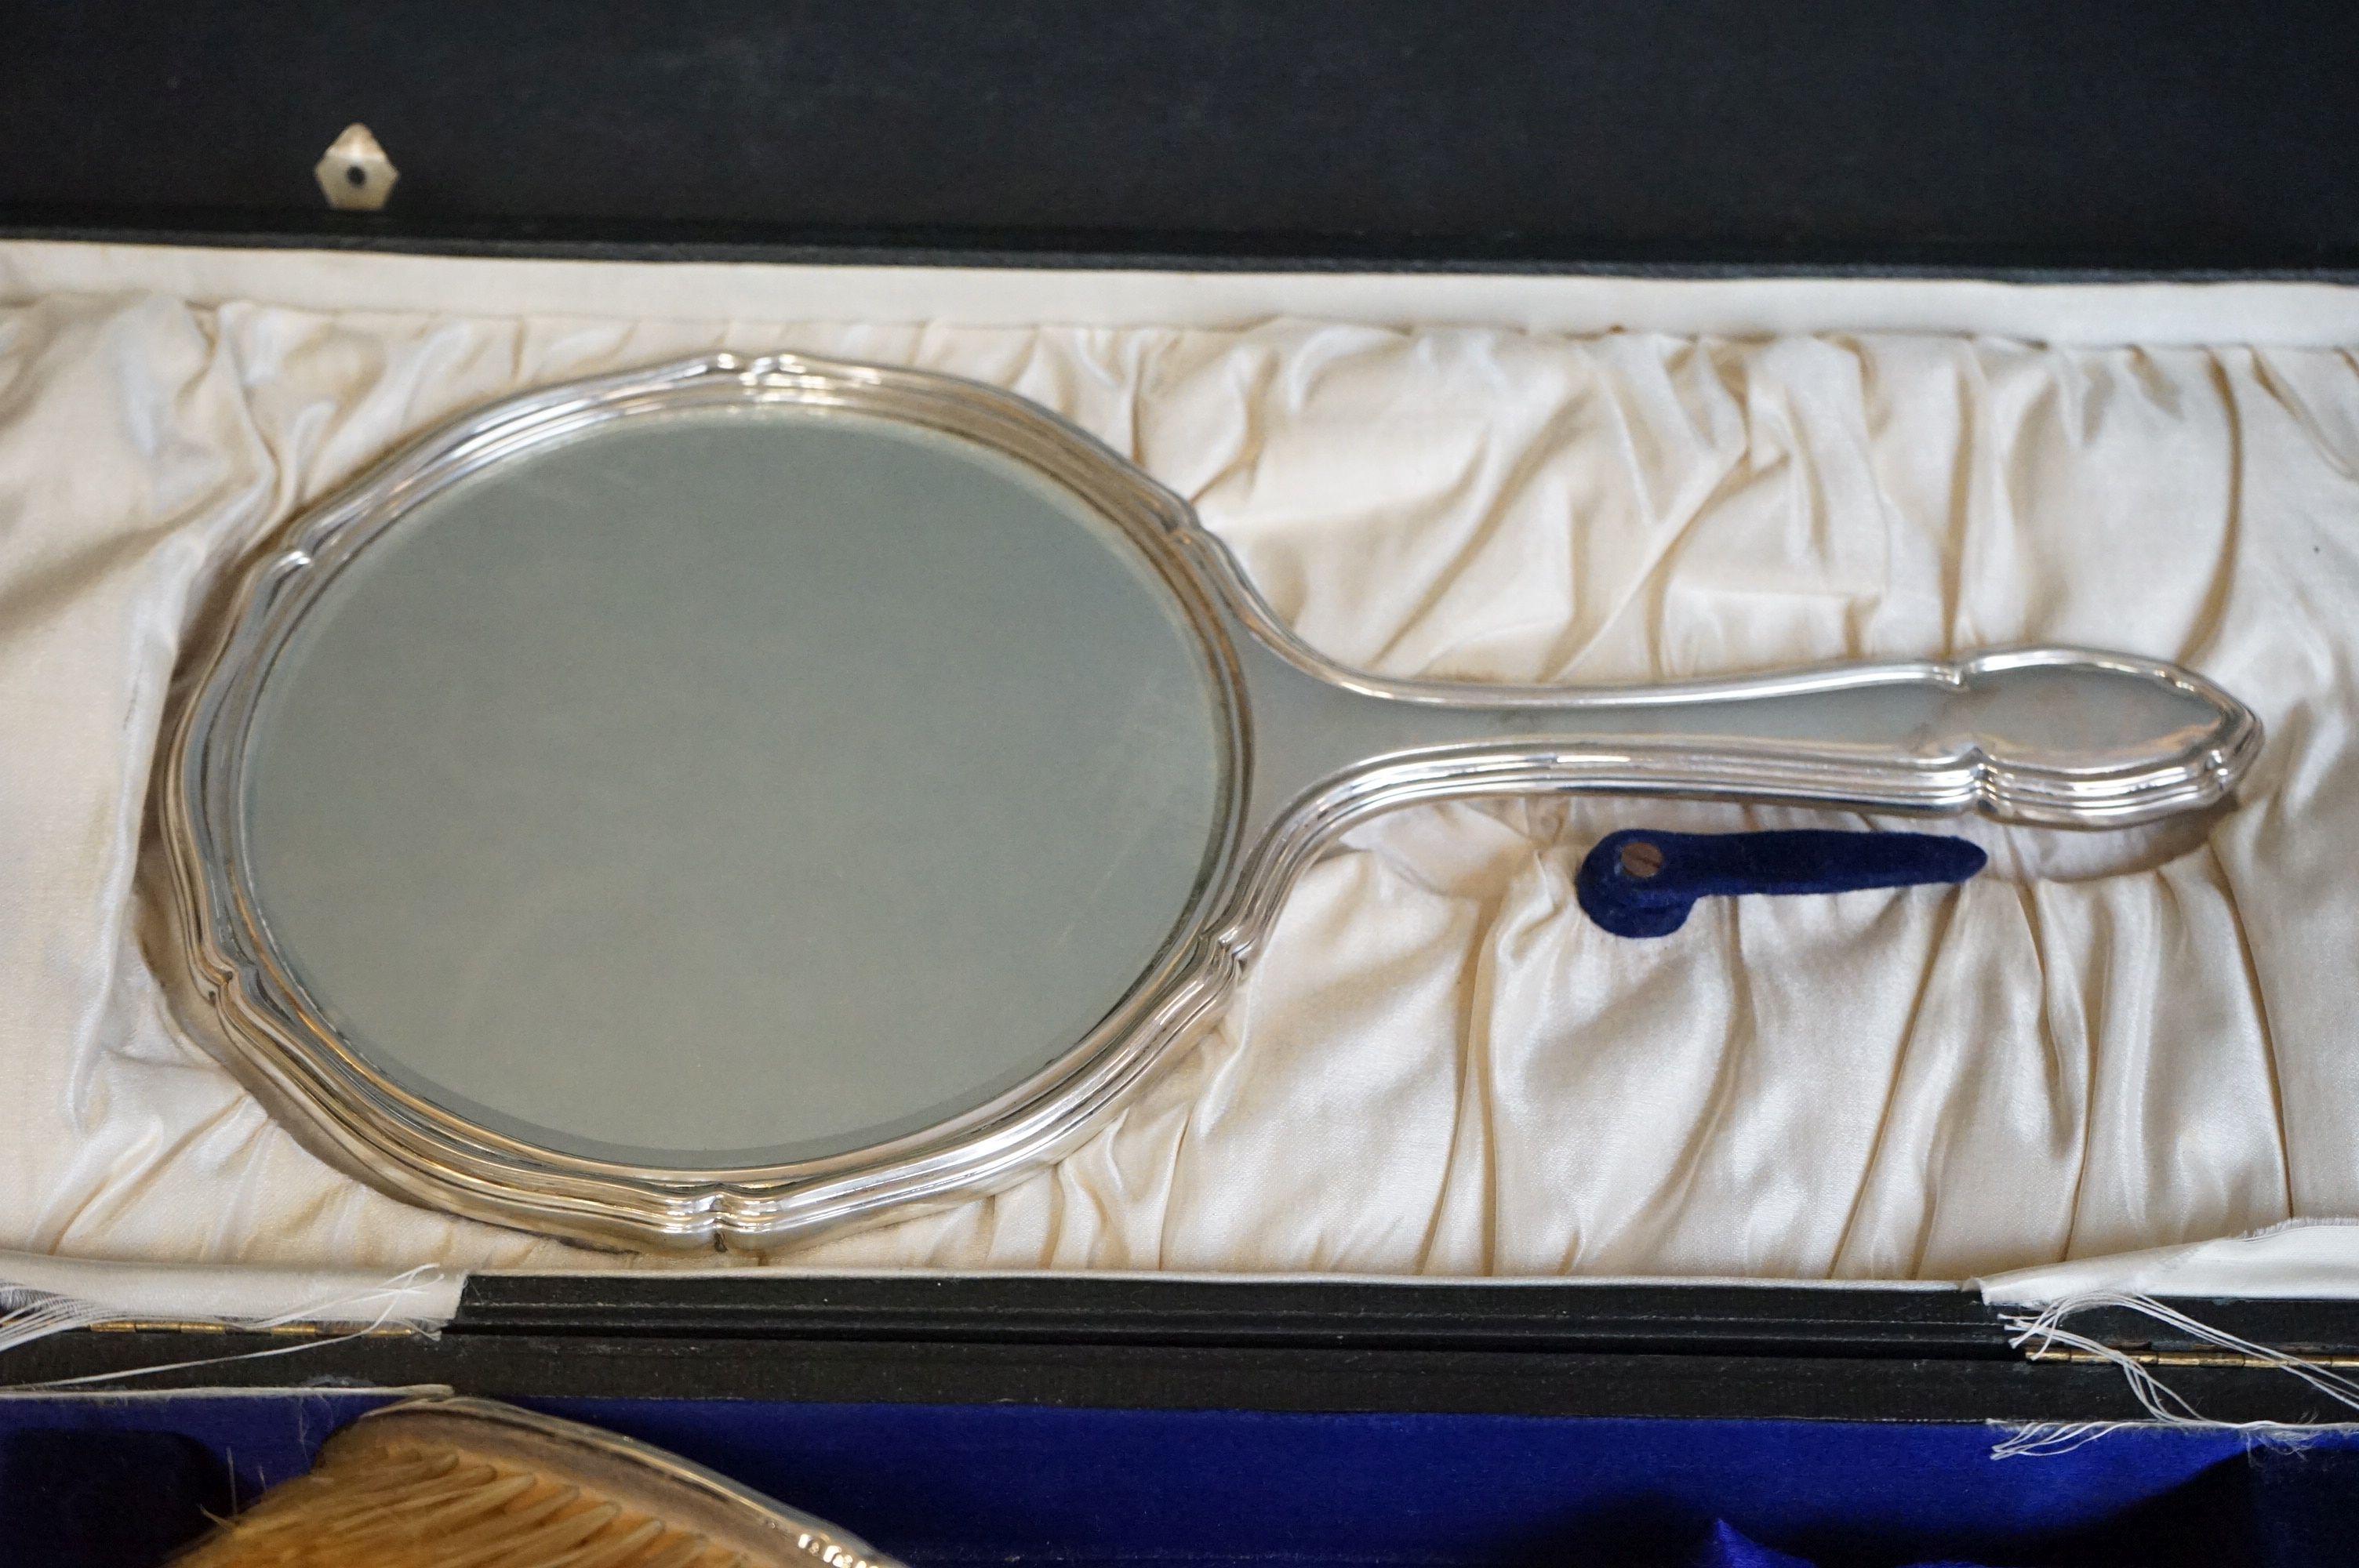 A Gorham Manufacturing Co sterling silver vanity brush & mirror set in original fitted box - Image 8 of 9